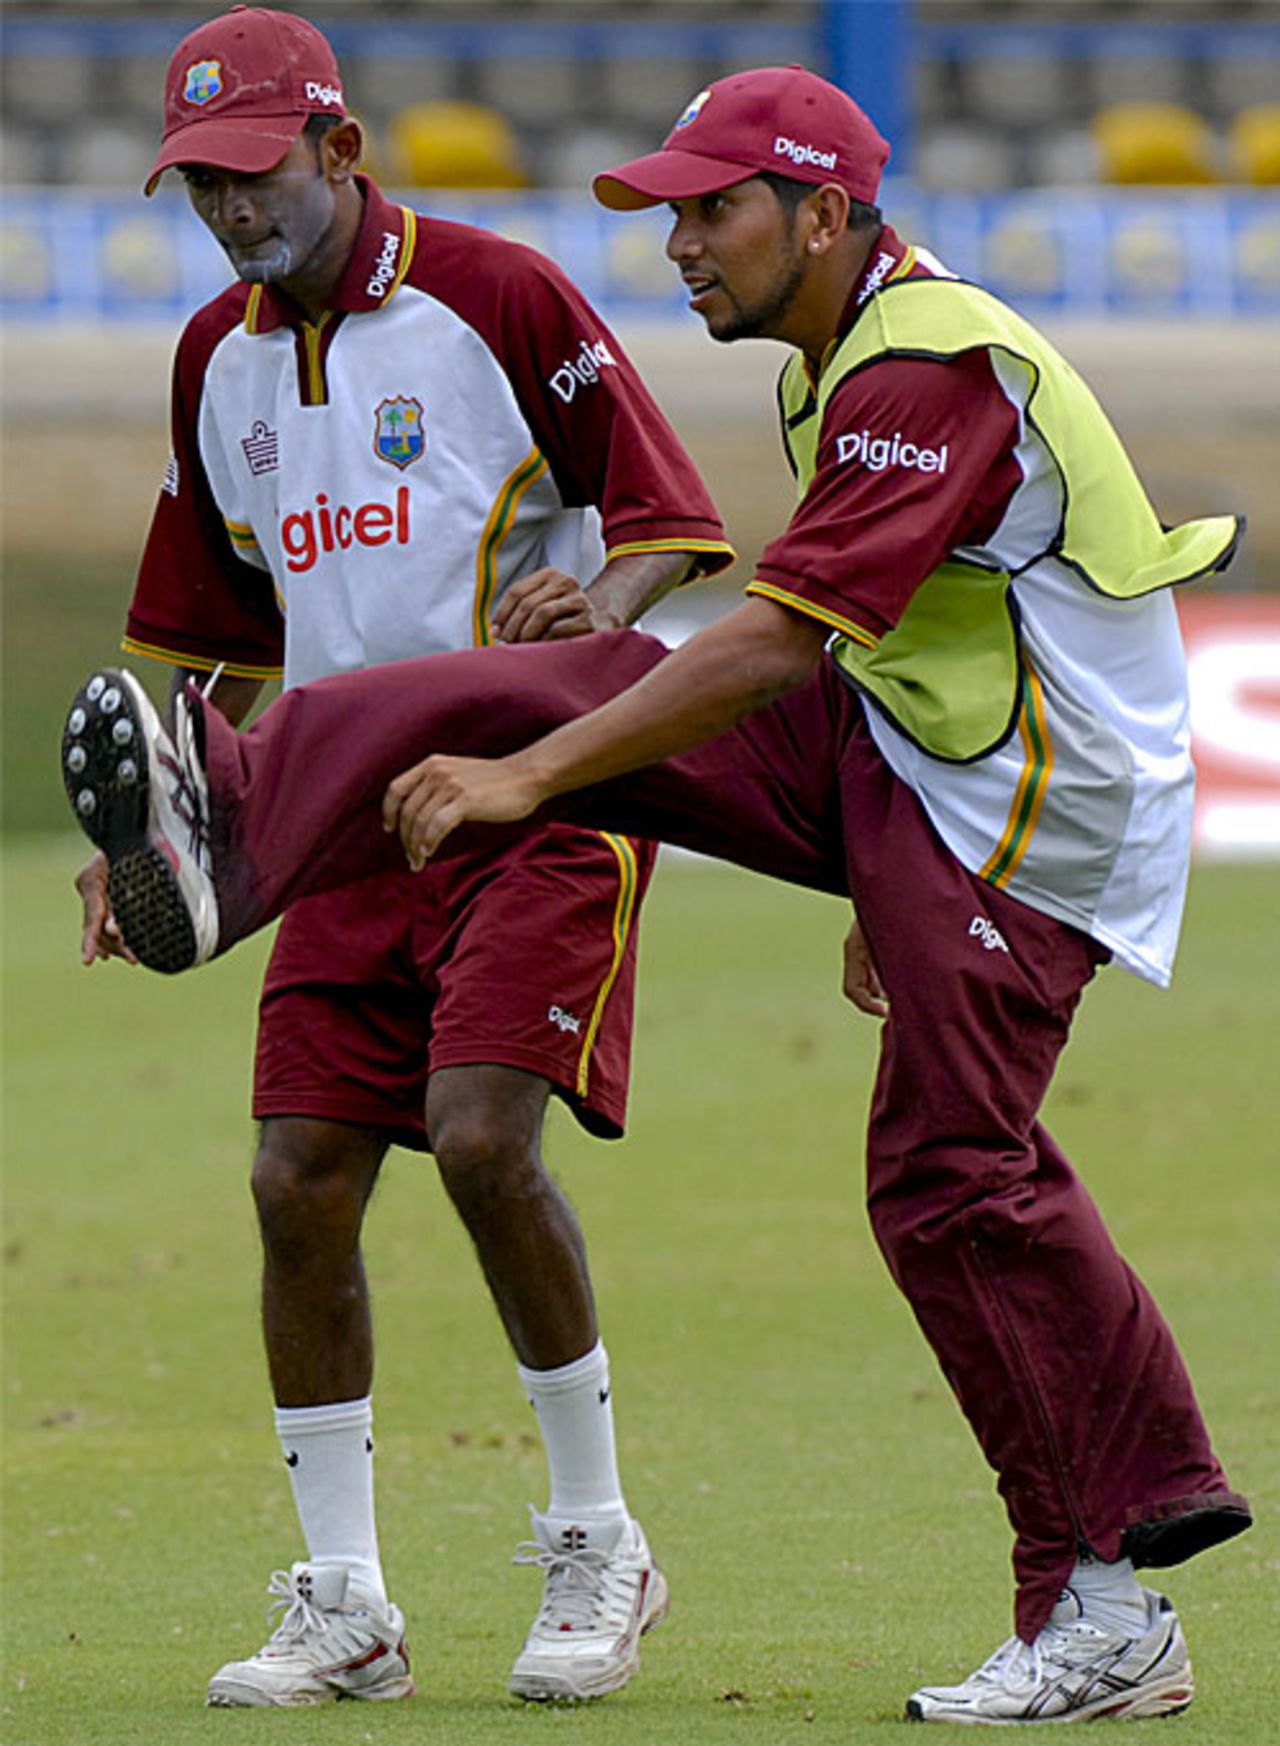 Sewnarine Chattergoon and Ramnaresh Sarwan stretch out, Queen's Park Oval, Trinidad, April 9, 2008